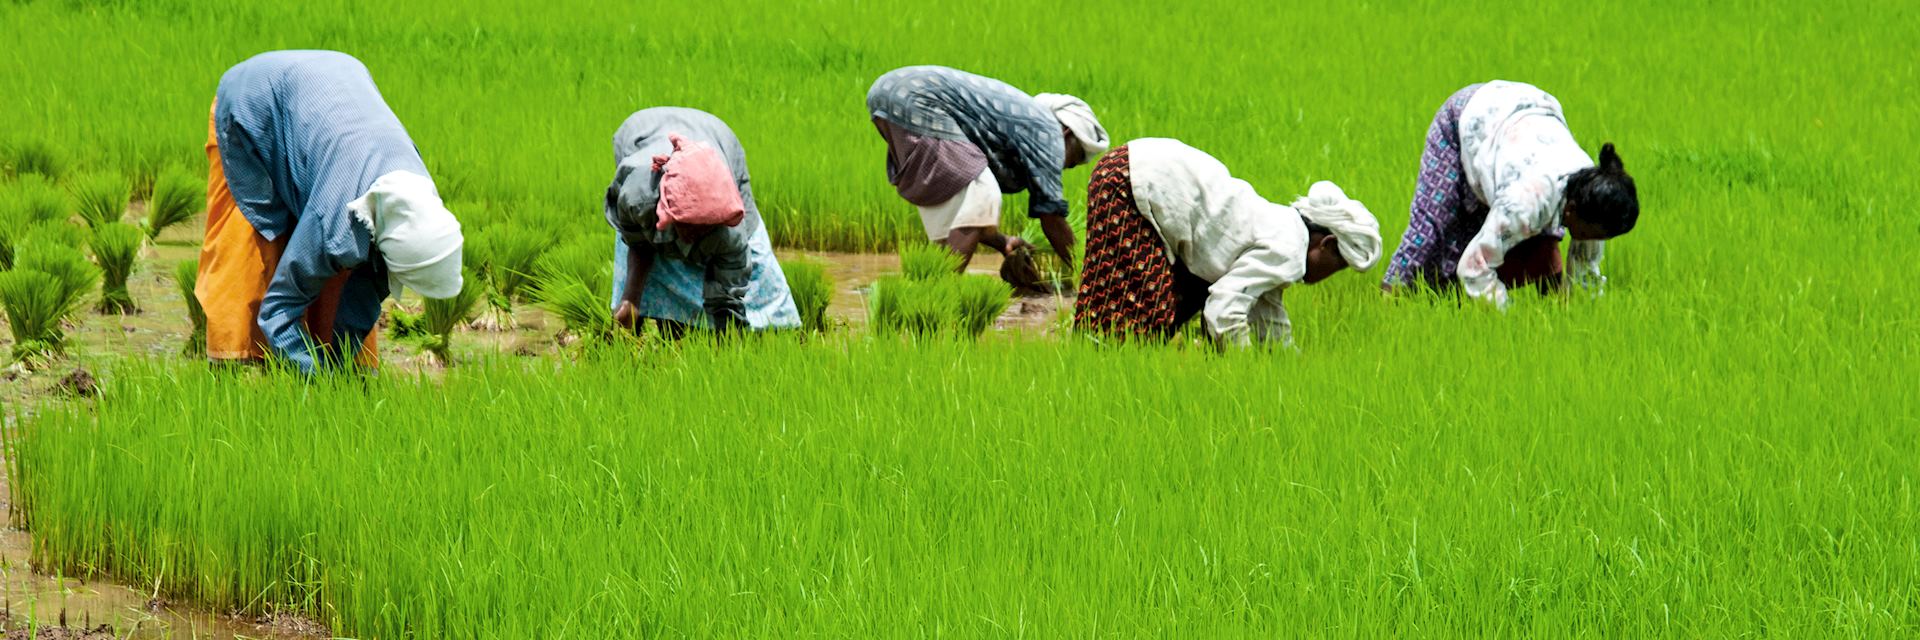 Workers in a paddy field in Palakkad